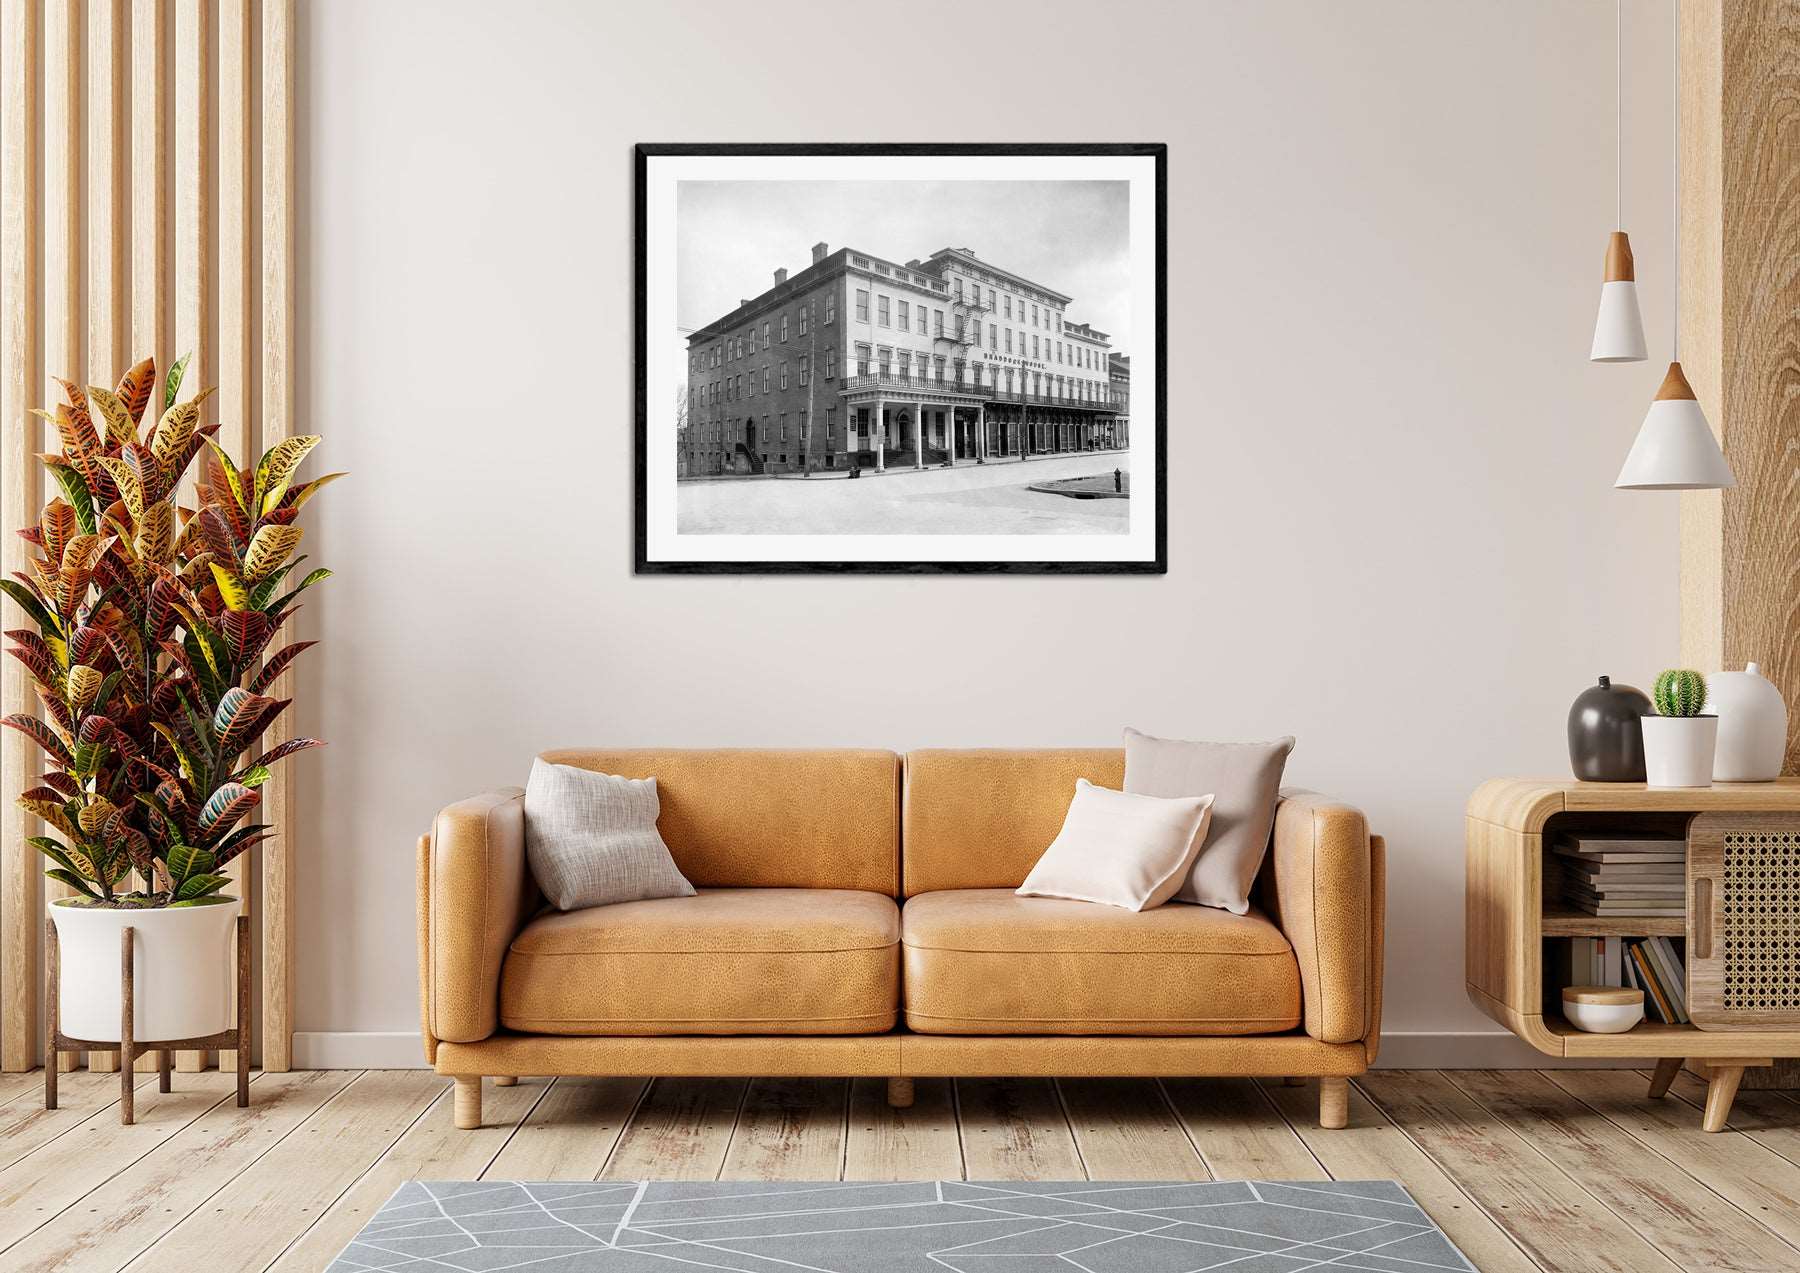 A framed paper print of Alexandria hanging on a living room wall above a yellow couch